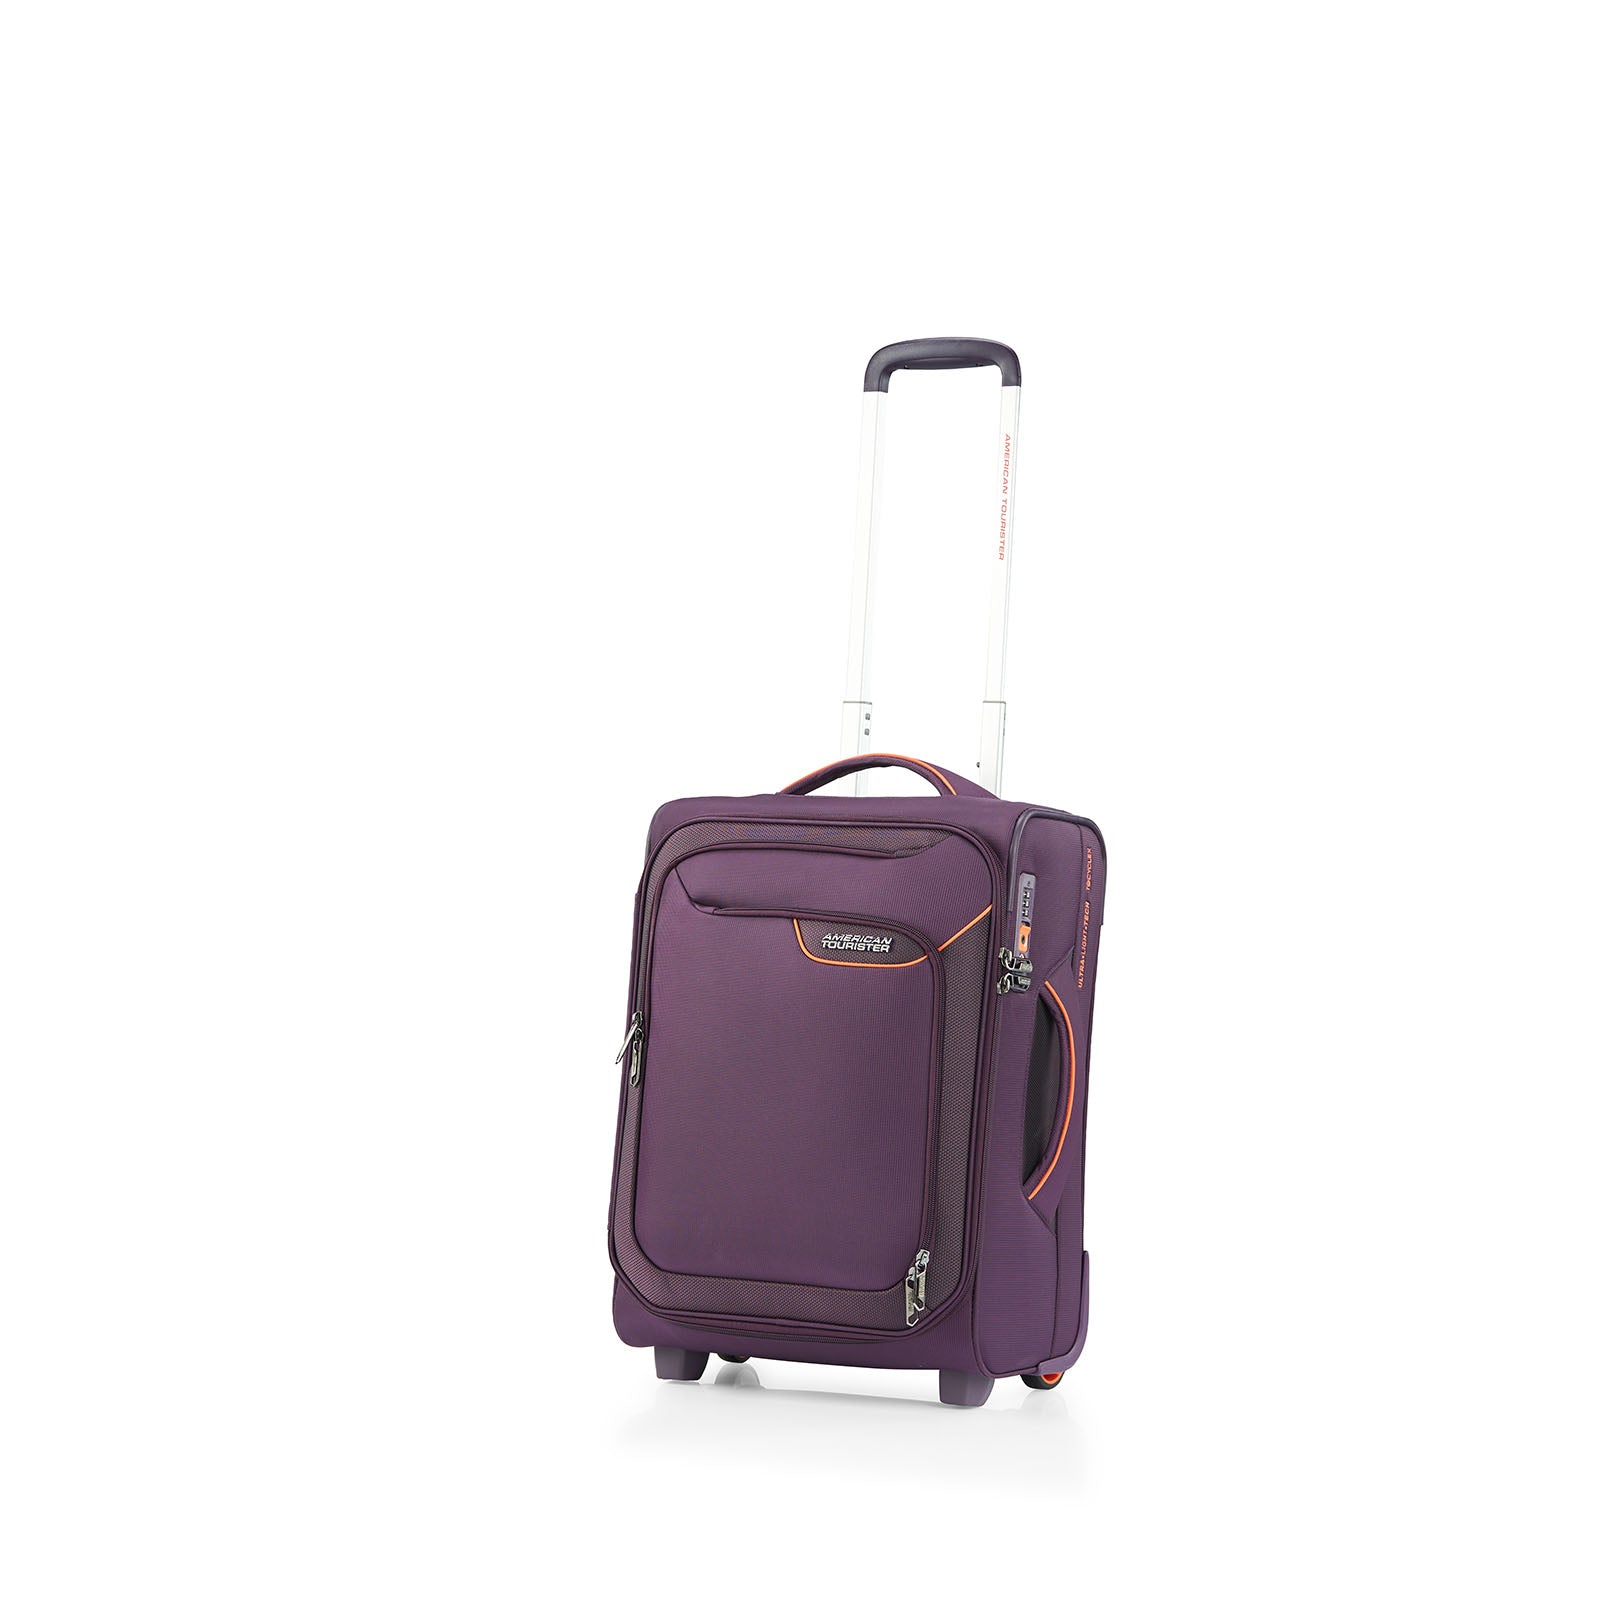 American-Tourister-Applite-4-Eco-50cm-Carry-On-Suitcase-Purple-Orange-Front-Angle